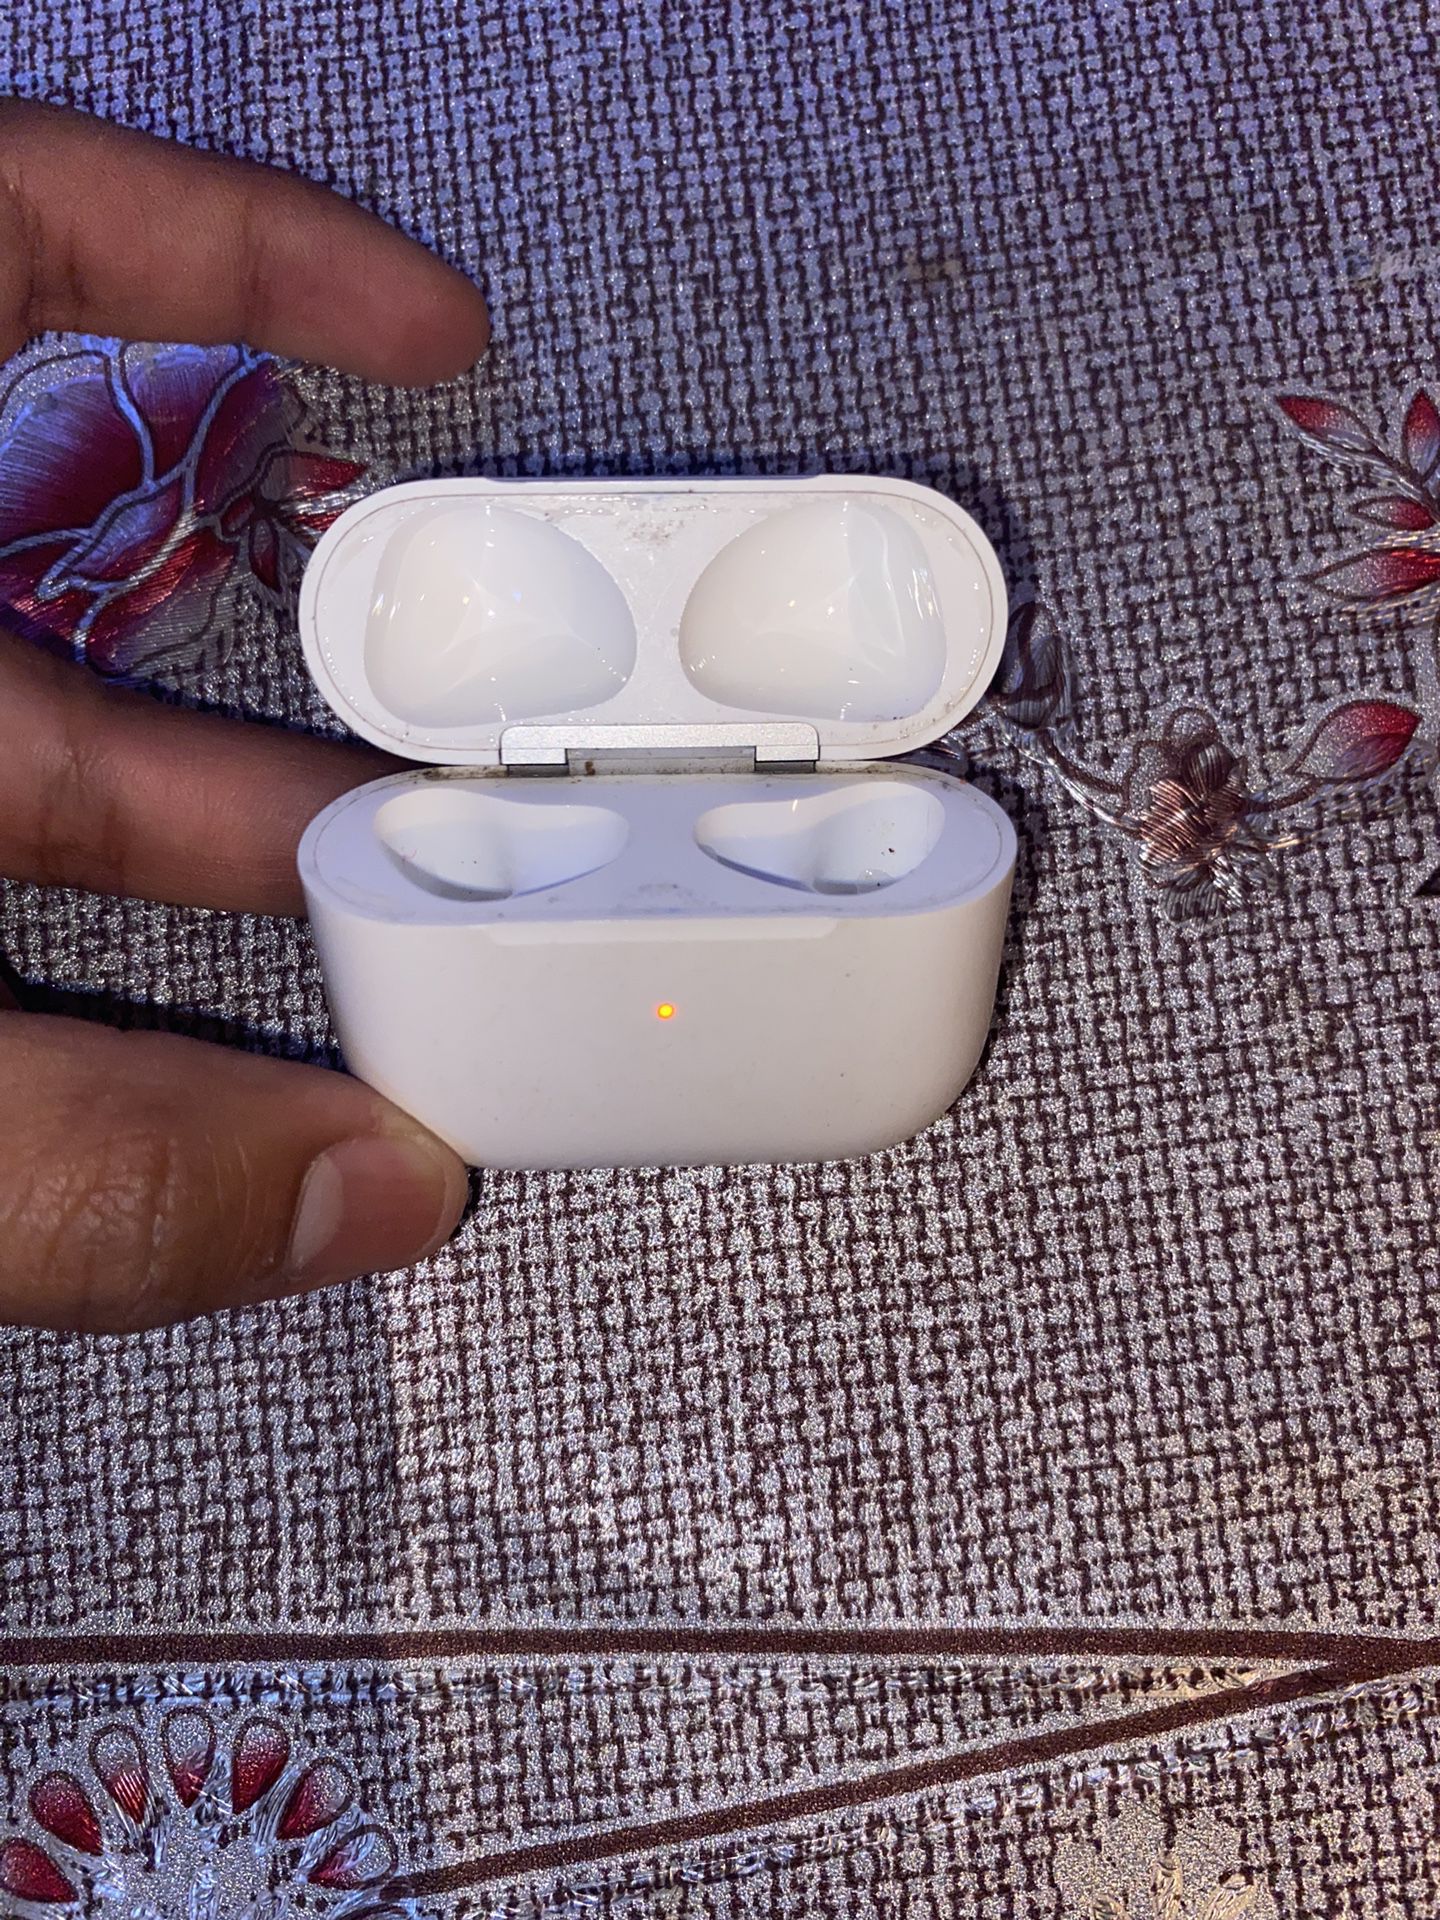 3RD Generation Airpod (CASE ONLY